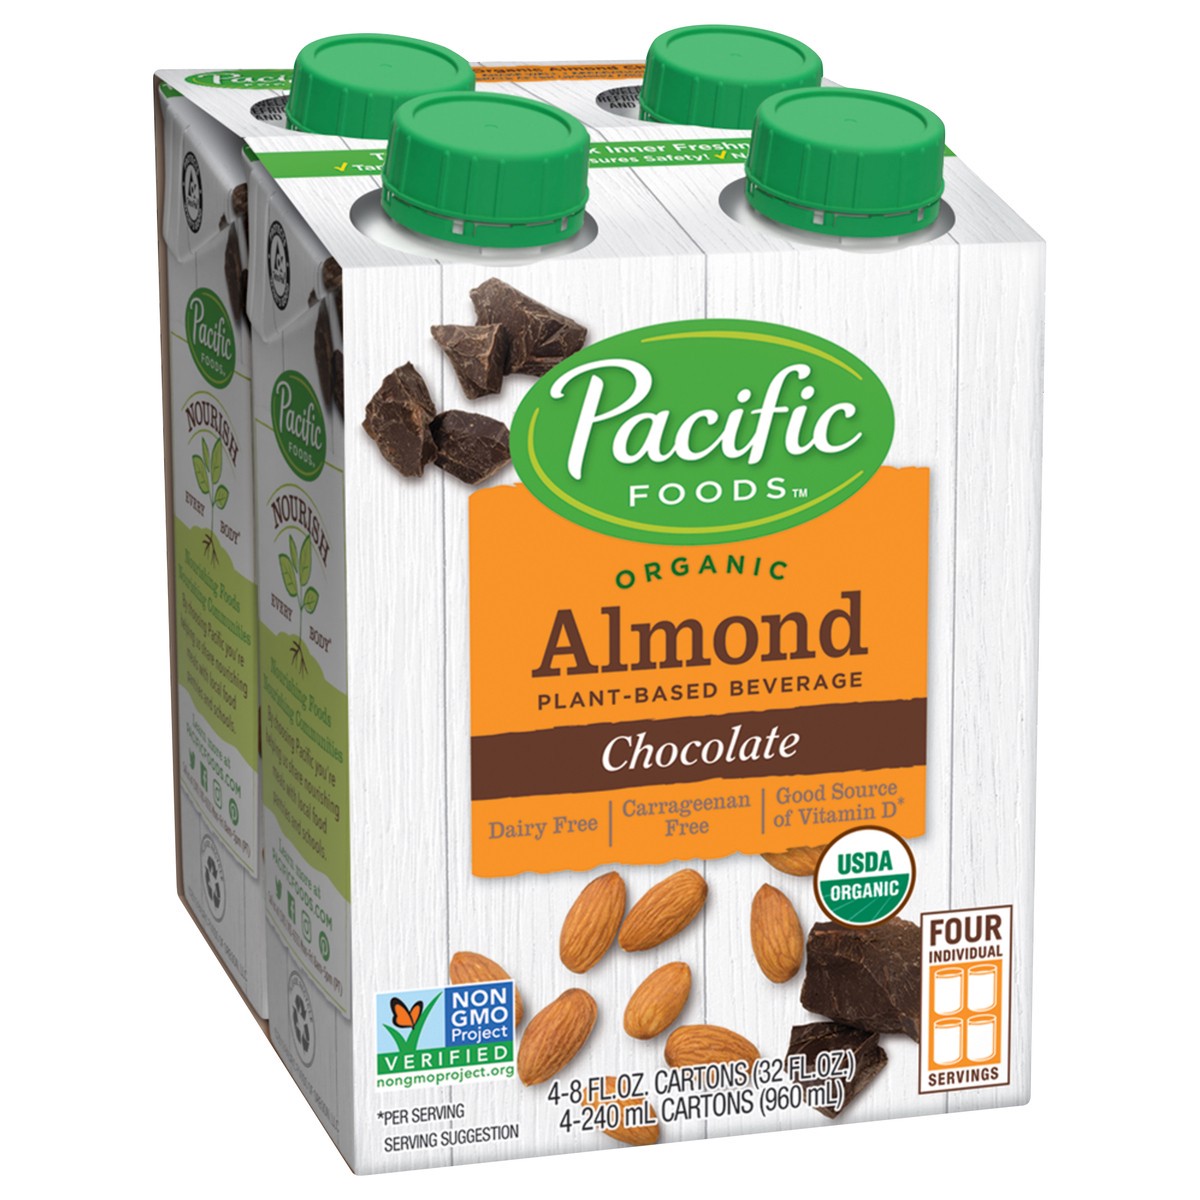 slide 2 of 12, Pacific Foods Organic Almond Chocolate Plant-Based Beverage, 8oz, 4-pack, 32 oz